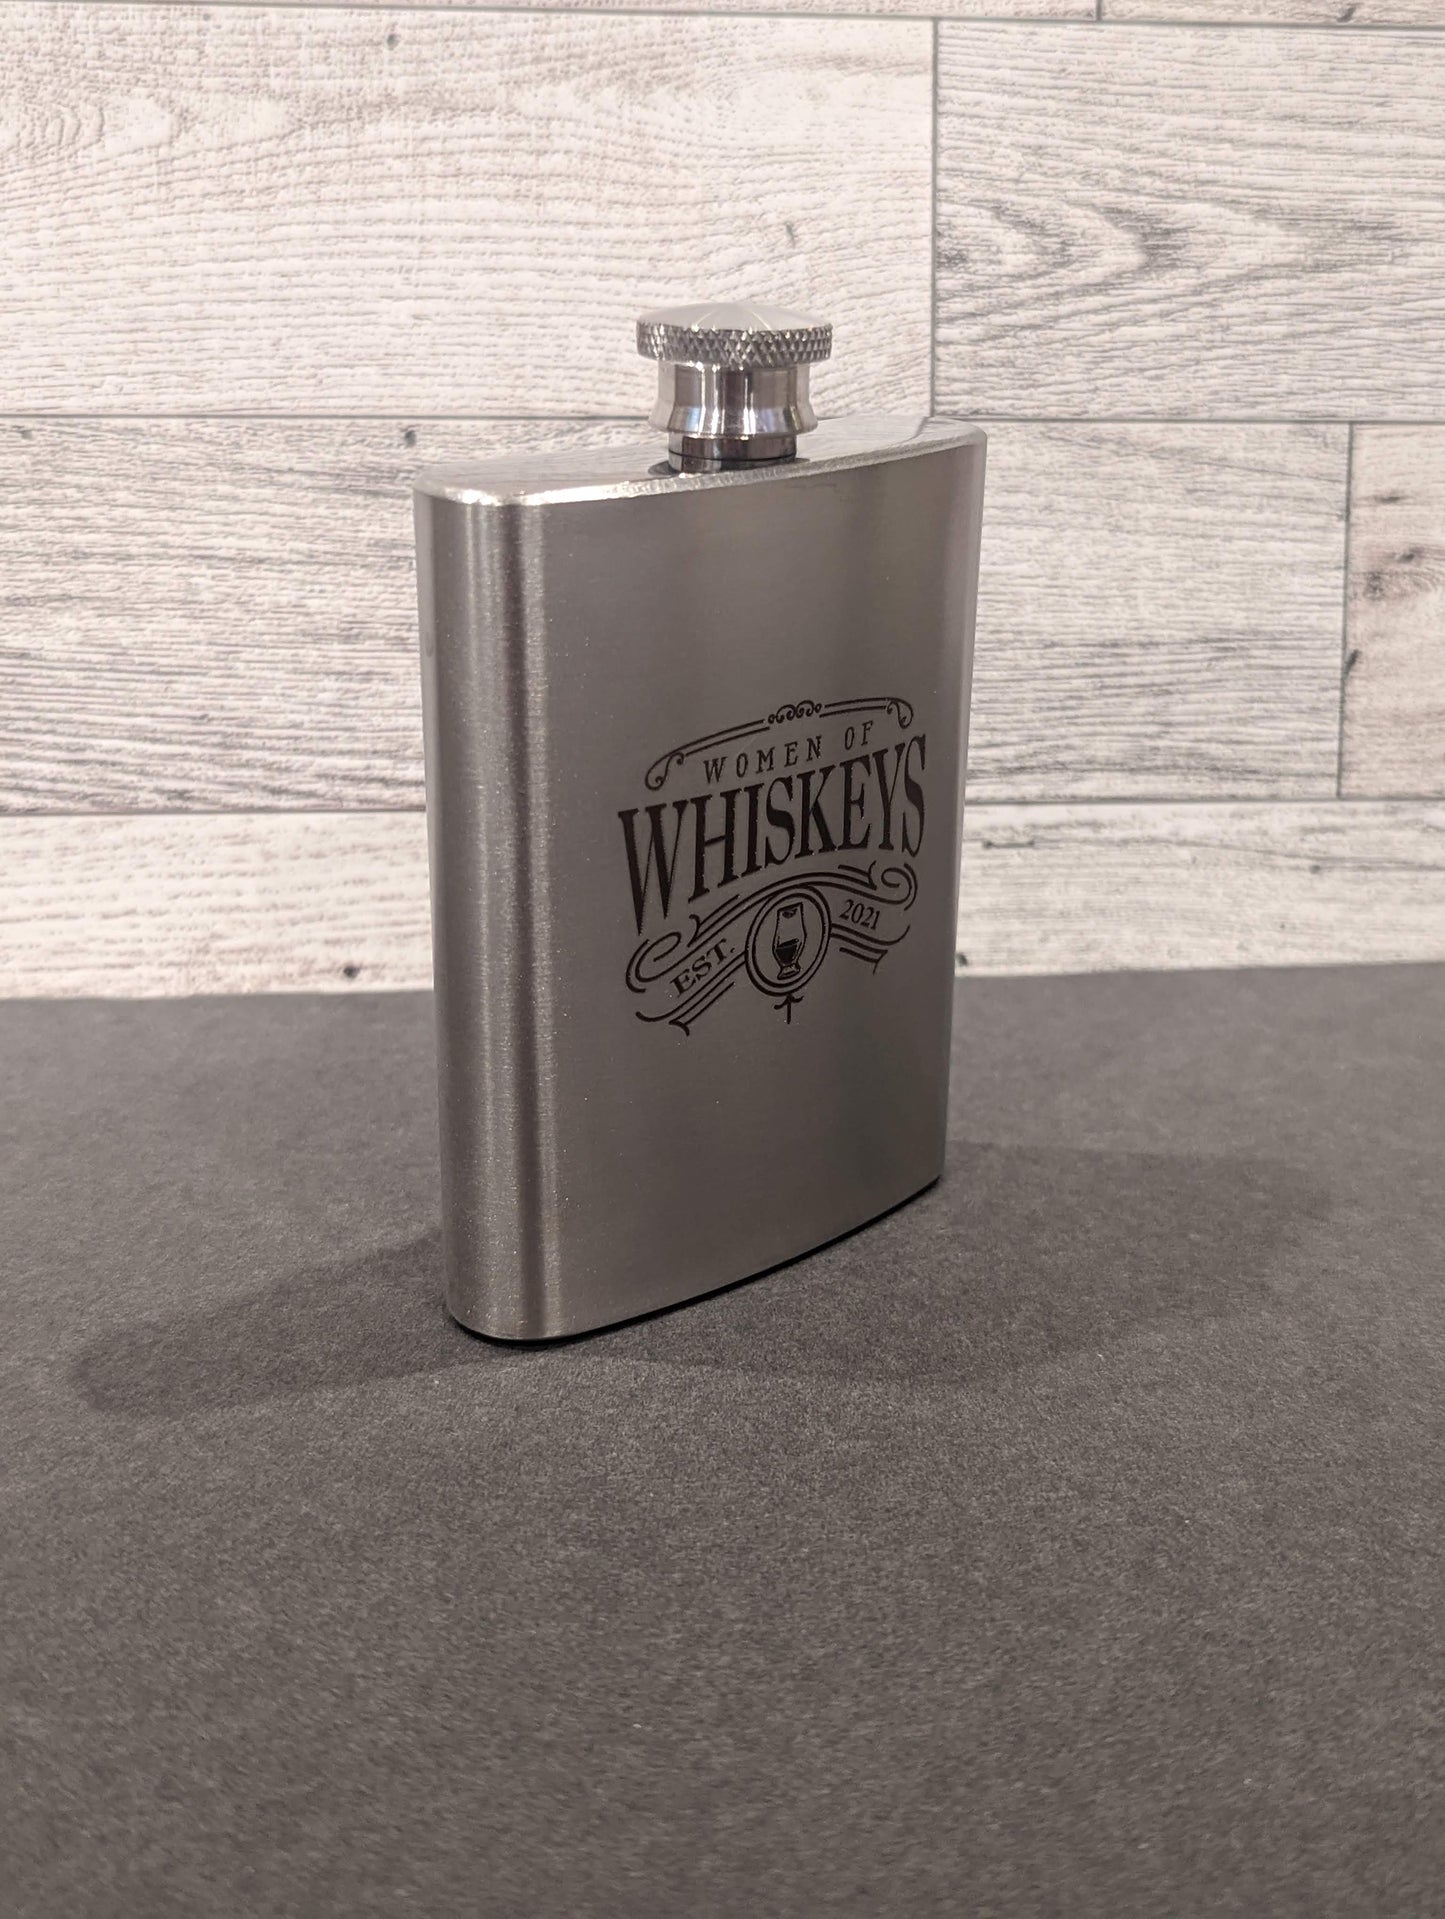 Women of Whiskeys Etched 4 oz Premium Stainless Steel Flask